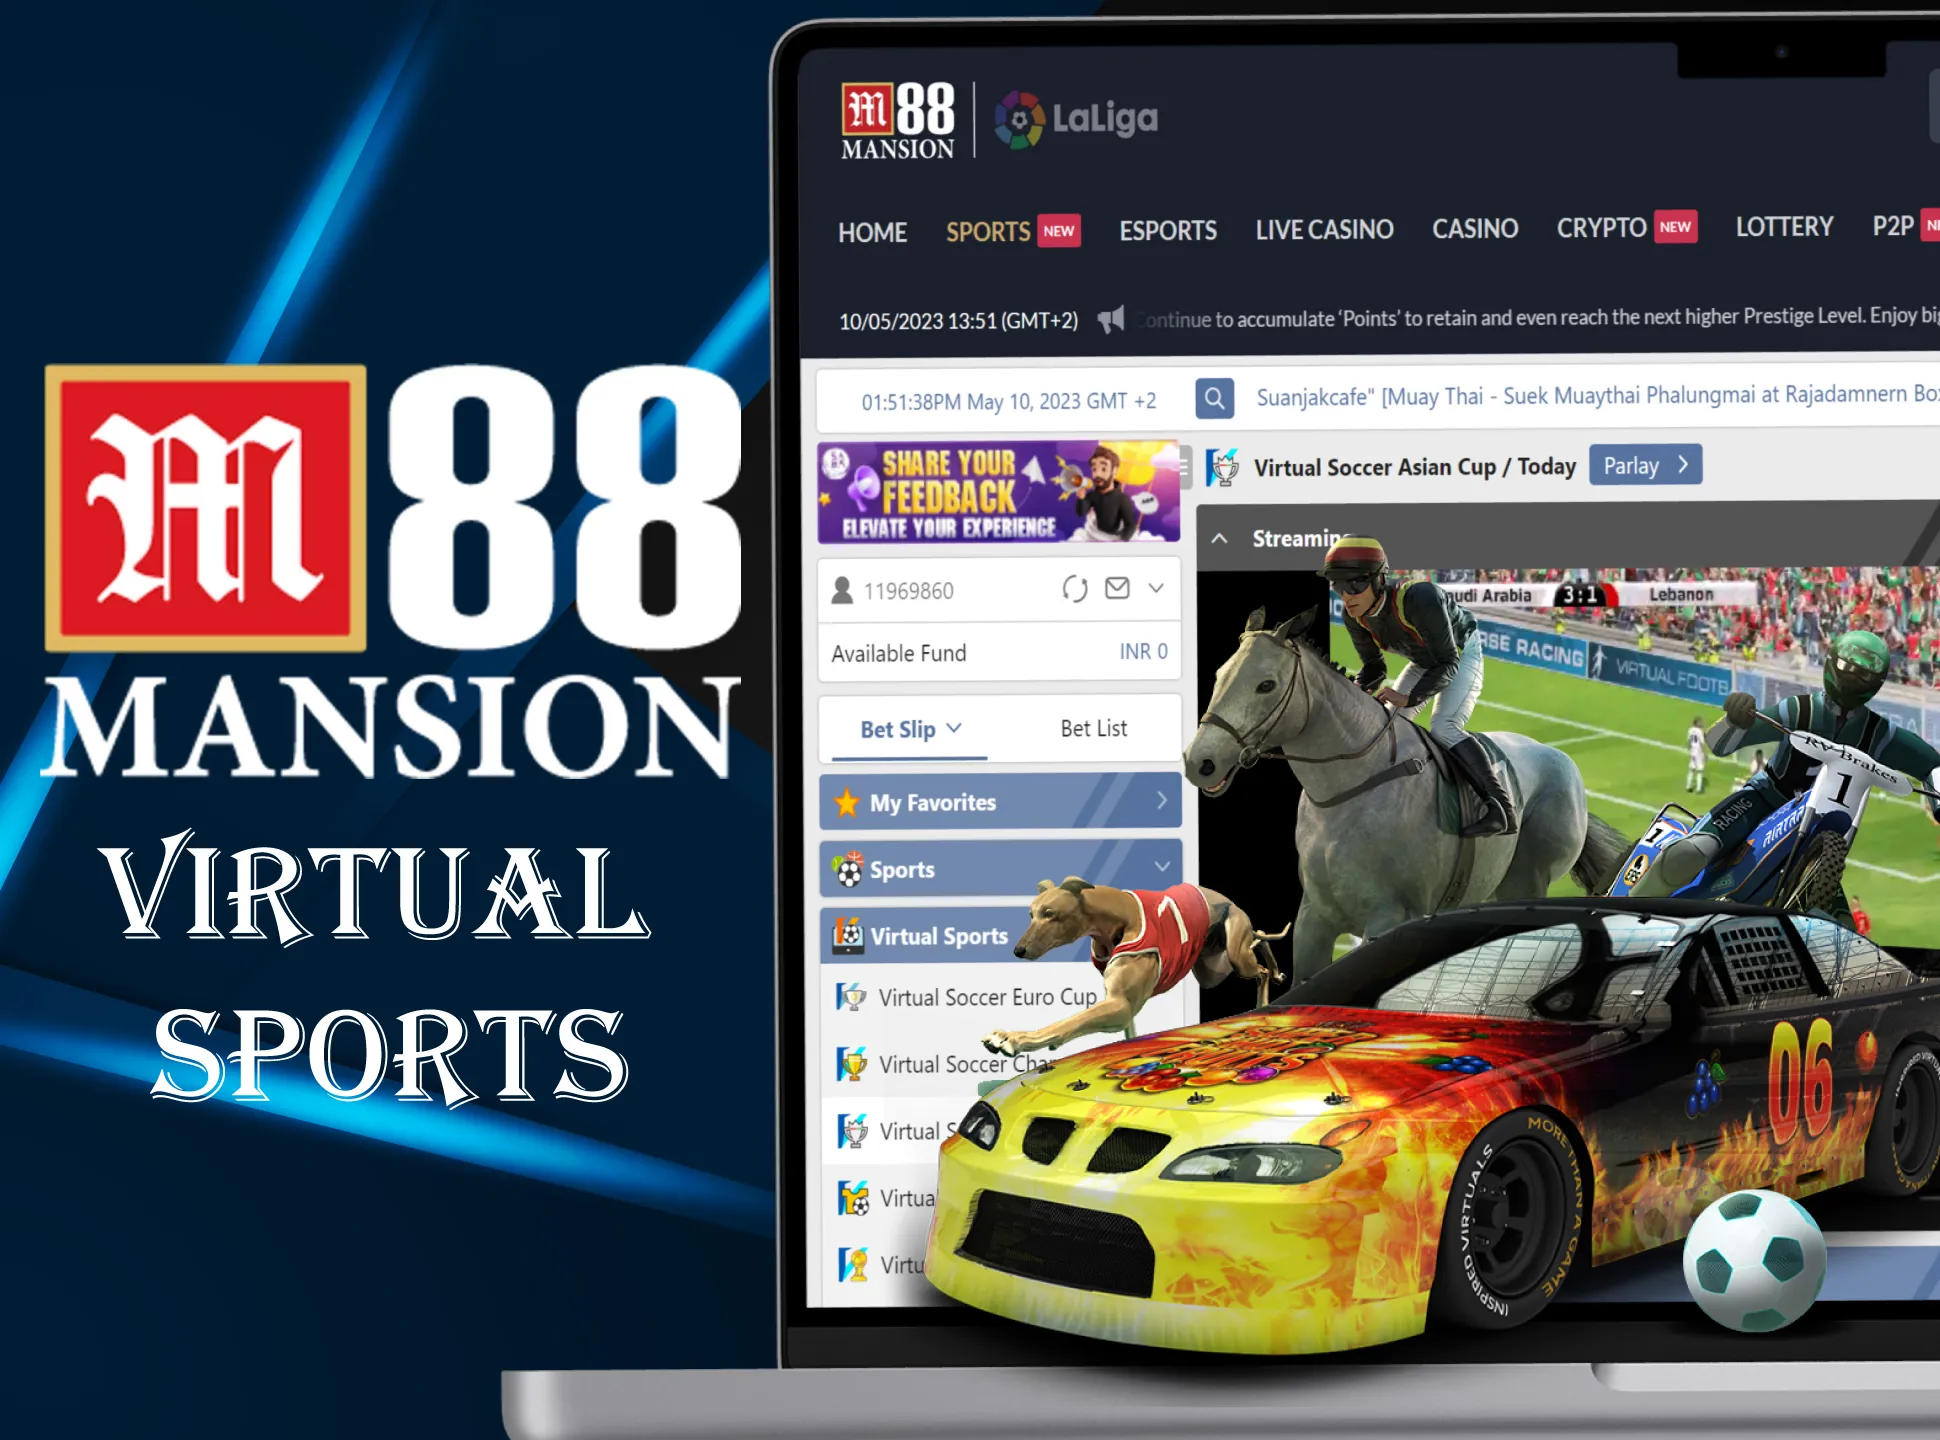 Search for most intresting virtual sports to bet on at M88.